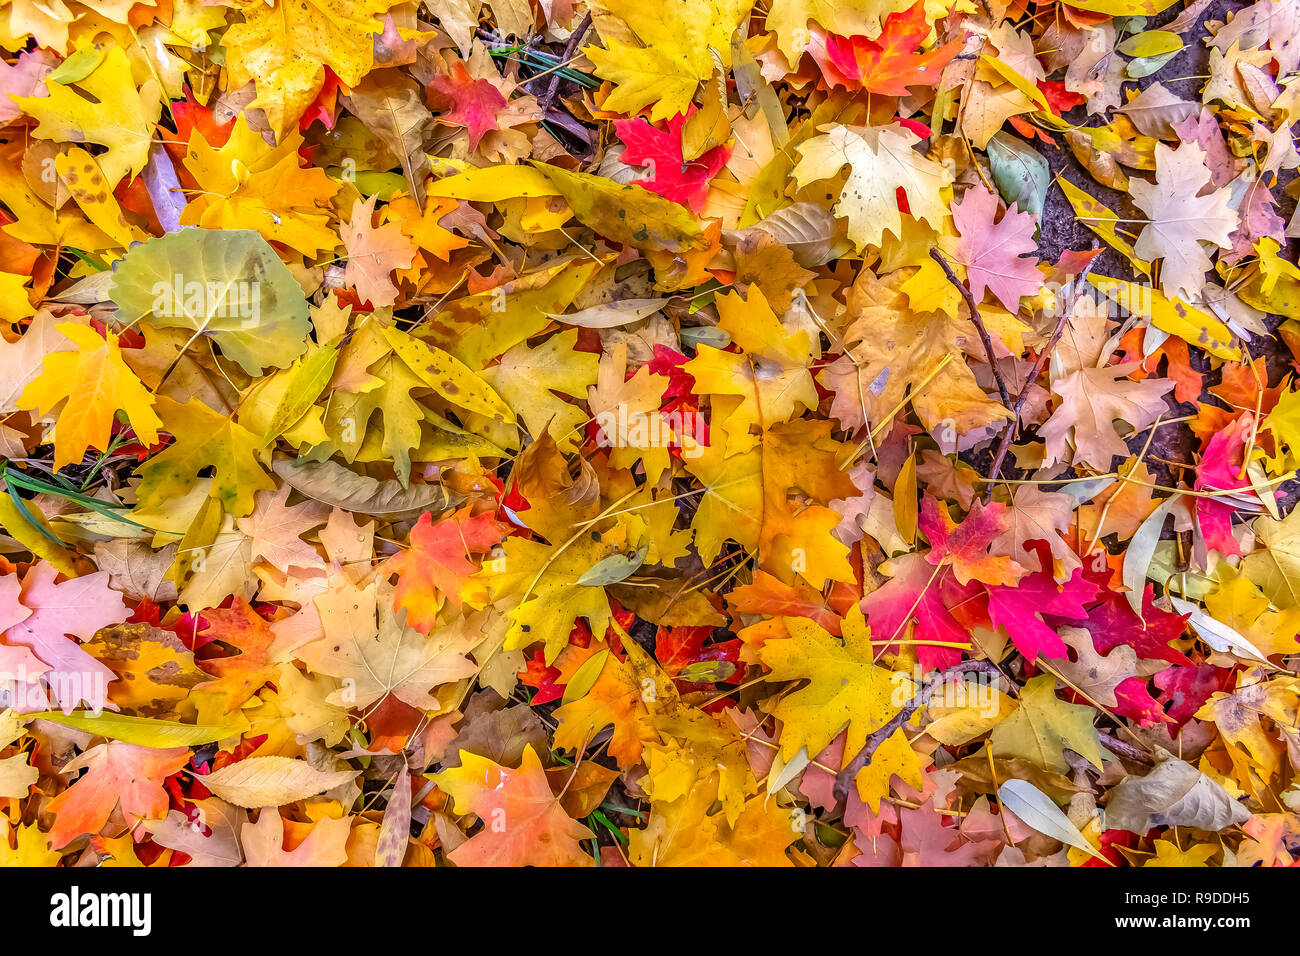 Autumn season with colorful fallen leaves in Utah Stock Photo